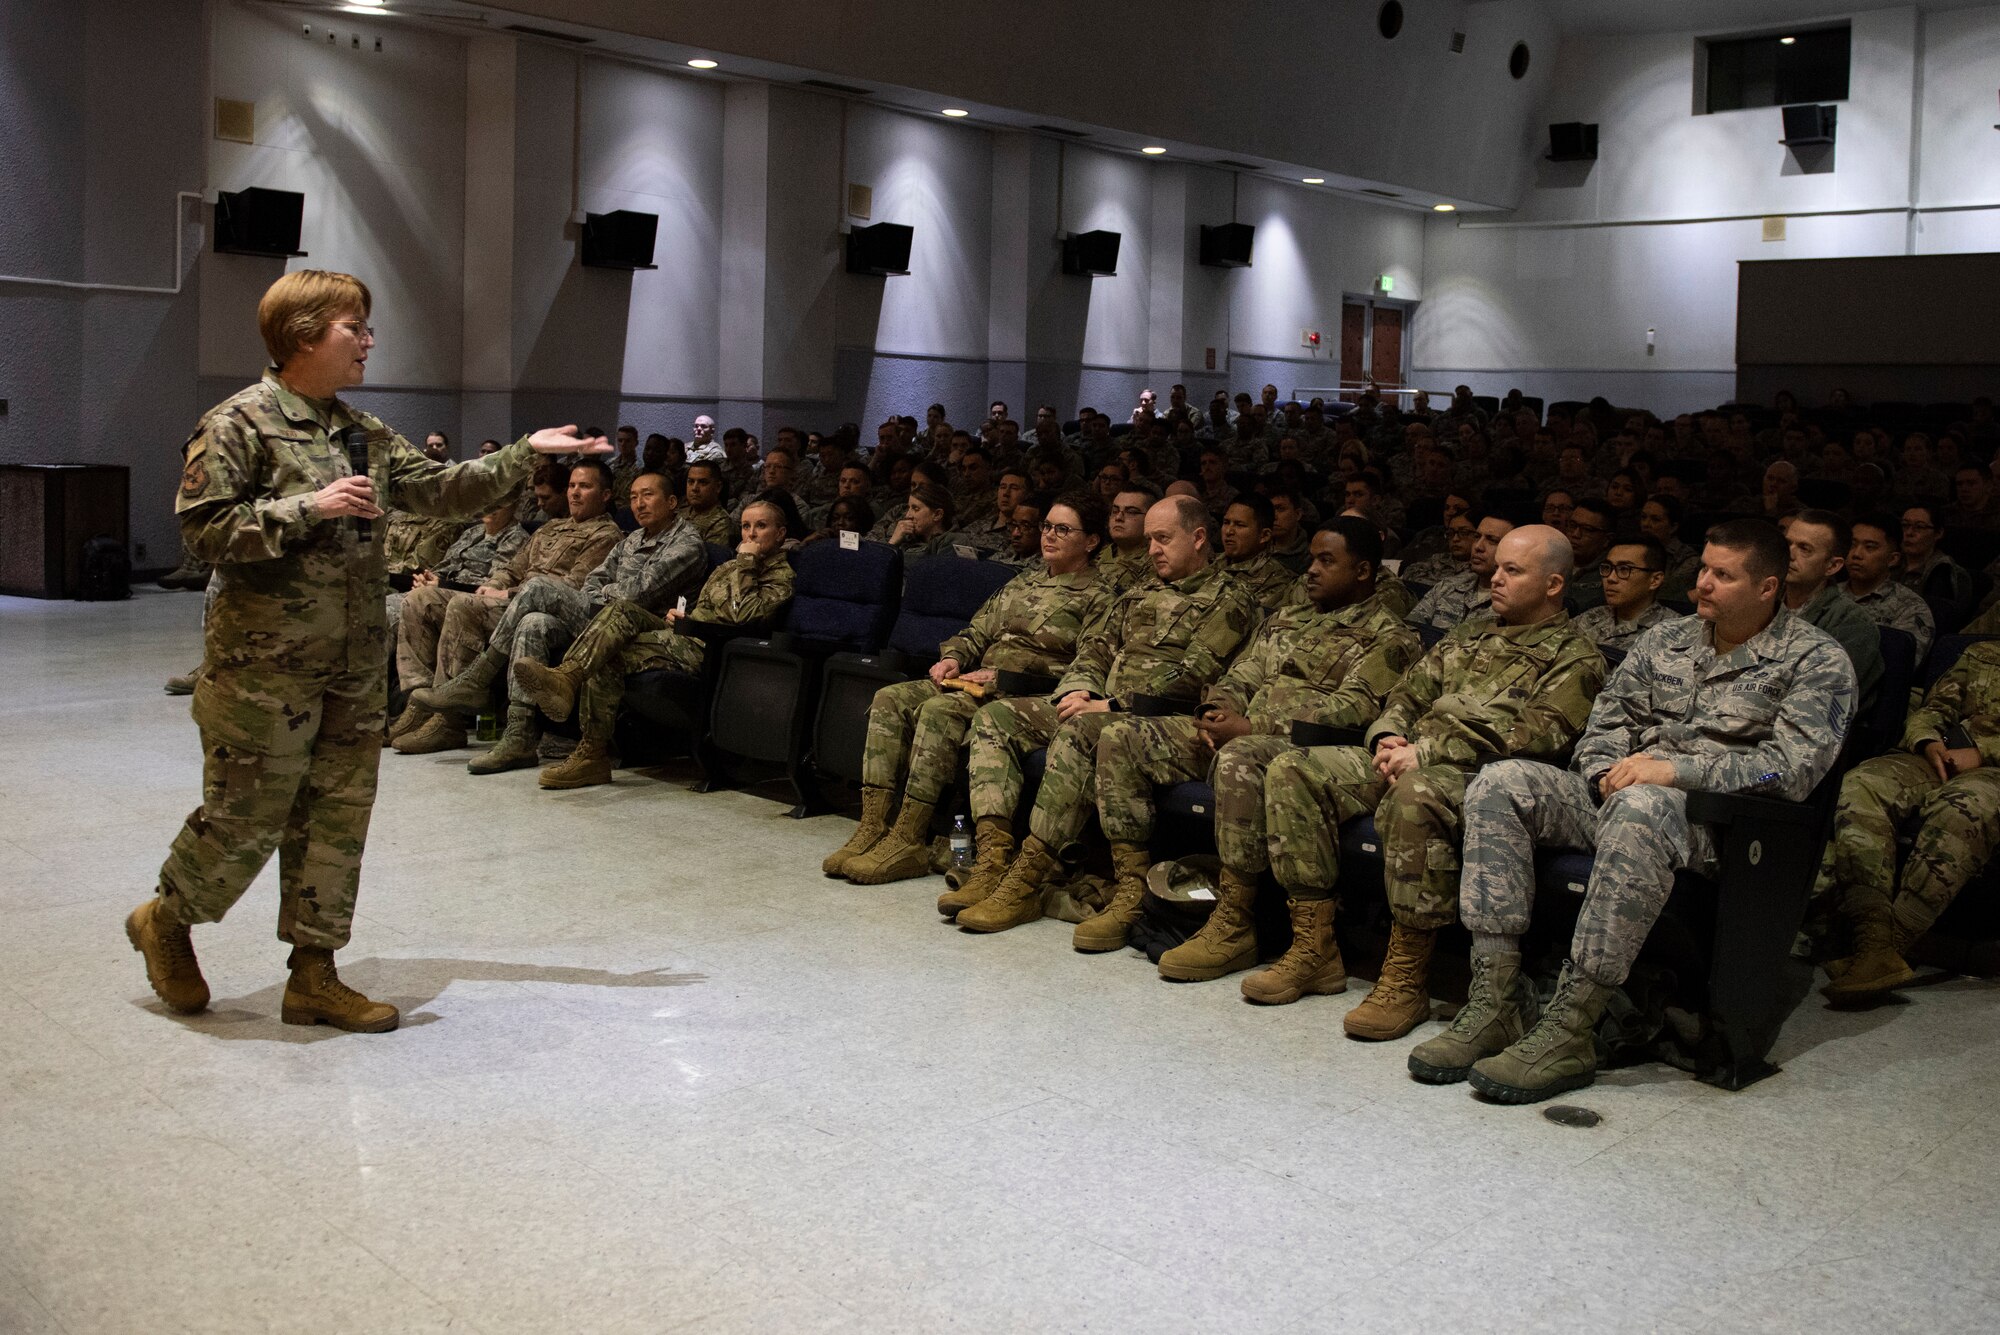 Lt. Gen. Dorothy Hogg, 23rd U.S. Air Force Surgeon General, discusses the importance of medical readiness and innovation with the 374th Medical Group during an all call at Yokota Air Base, Japan, Jan 29, 2019.